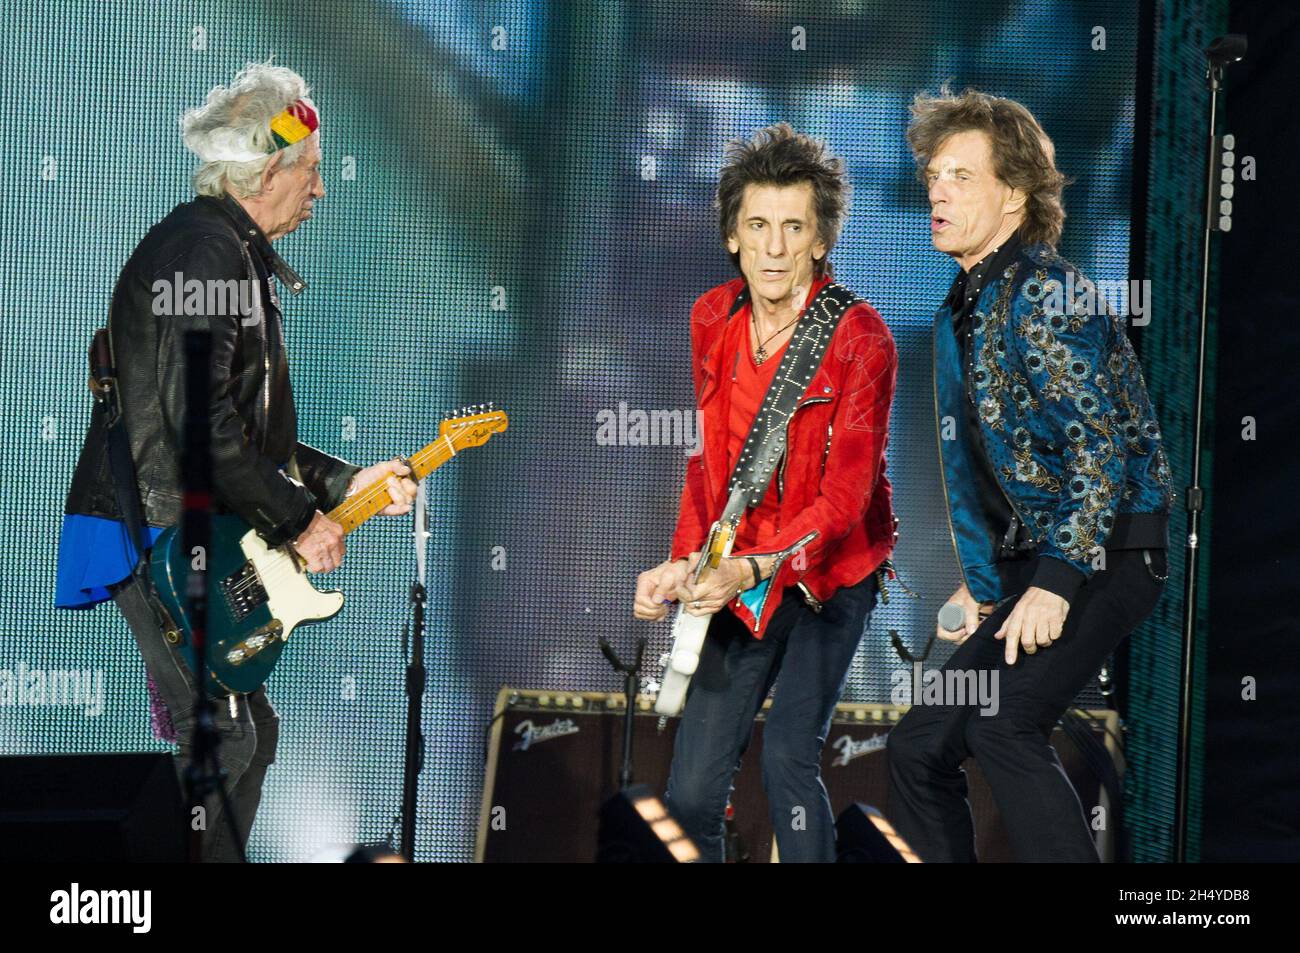 Mick Jagger, Keith Richards and Ronnie Wood of The Rolling Stones perform on stage at Ricoh Arena on June 02, 2018 in Coventry, England. Picture date: Saturday 02 June, 2018. Photo credit: Katja Ogrin/ EMPICS Entertainment. Stock Photo